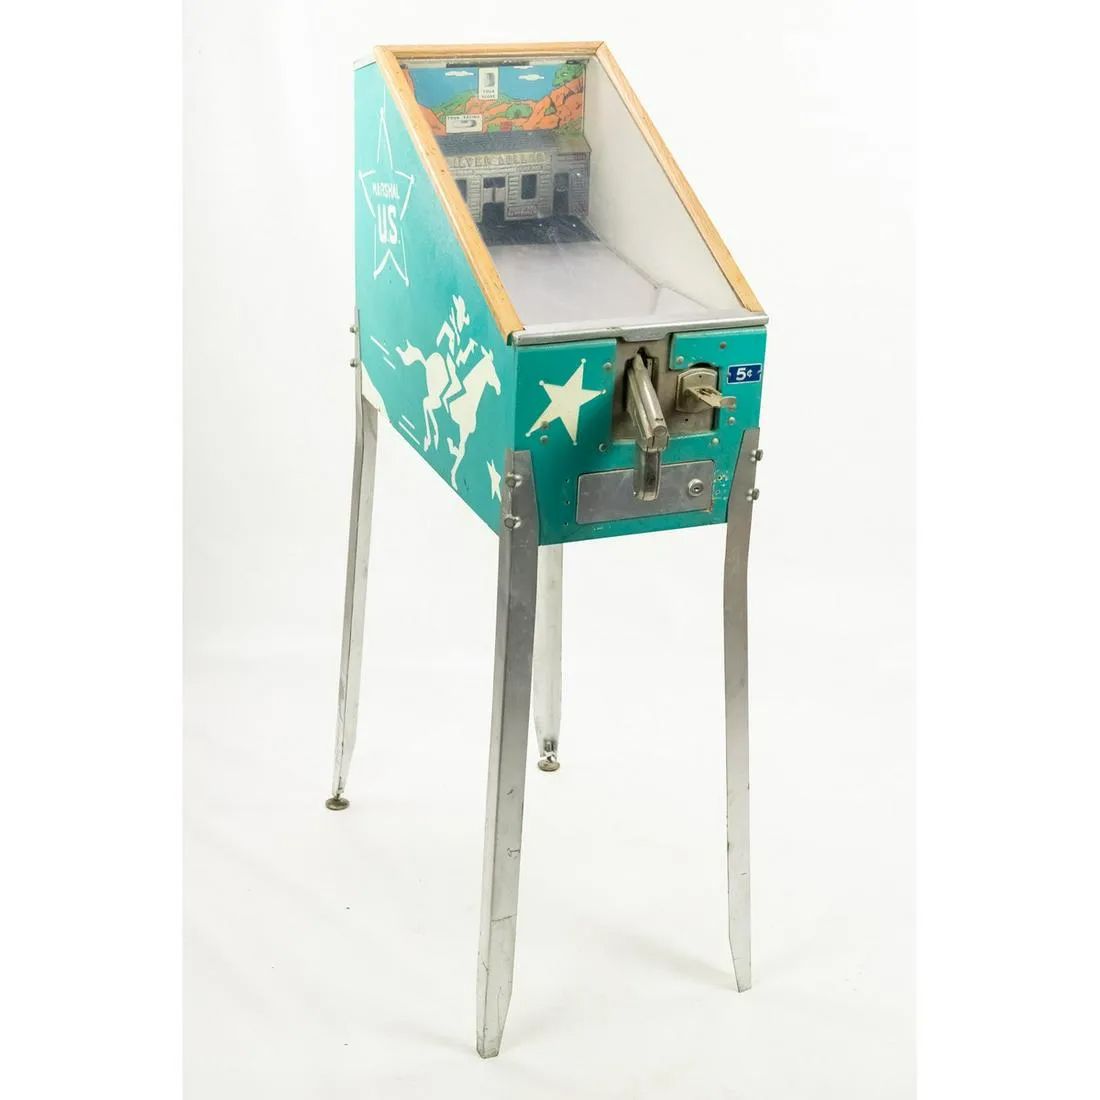 1950s U.S. Marshall Coin-op Shooting Arcade Game 1950s U.S. Marshall coin-op sho&hellip;